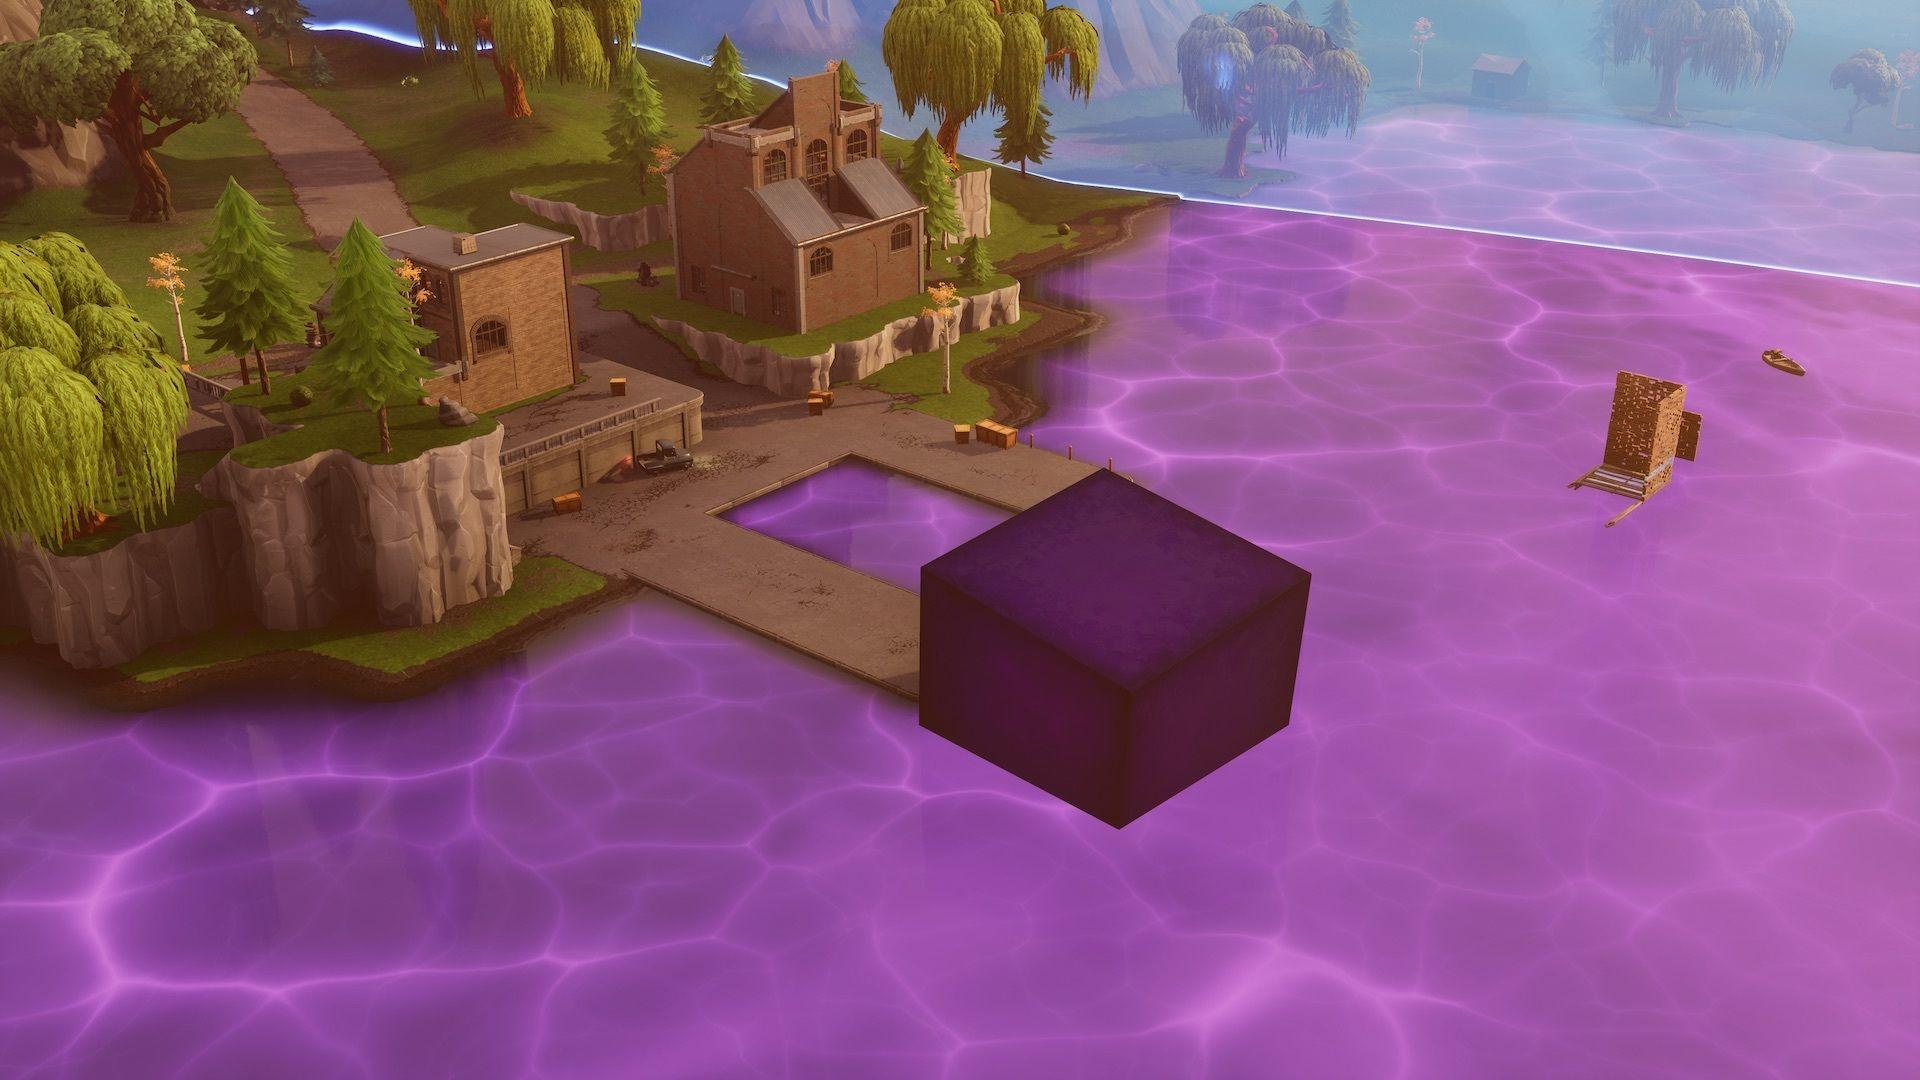 The Fortnite Cube Is Dead, And Loot Lake Has Turned Purple And